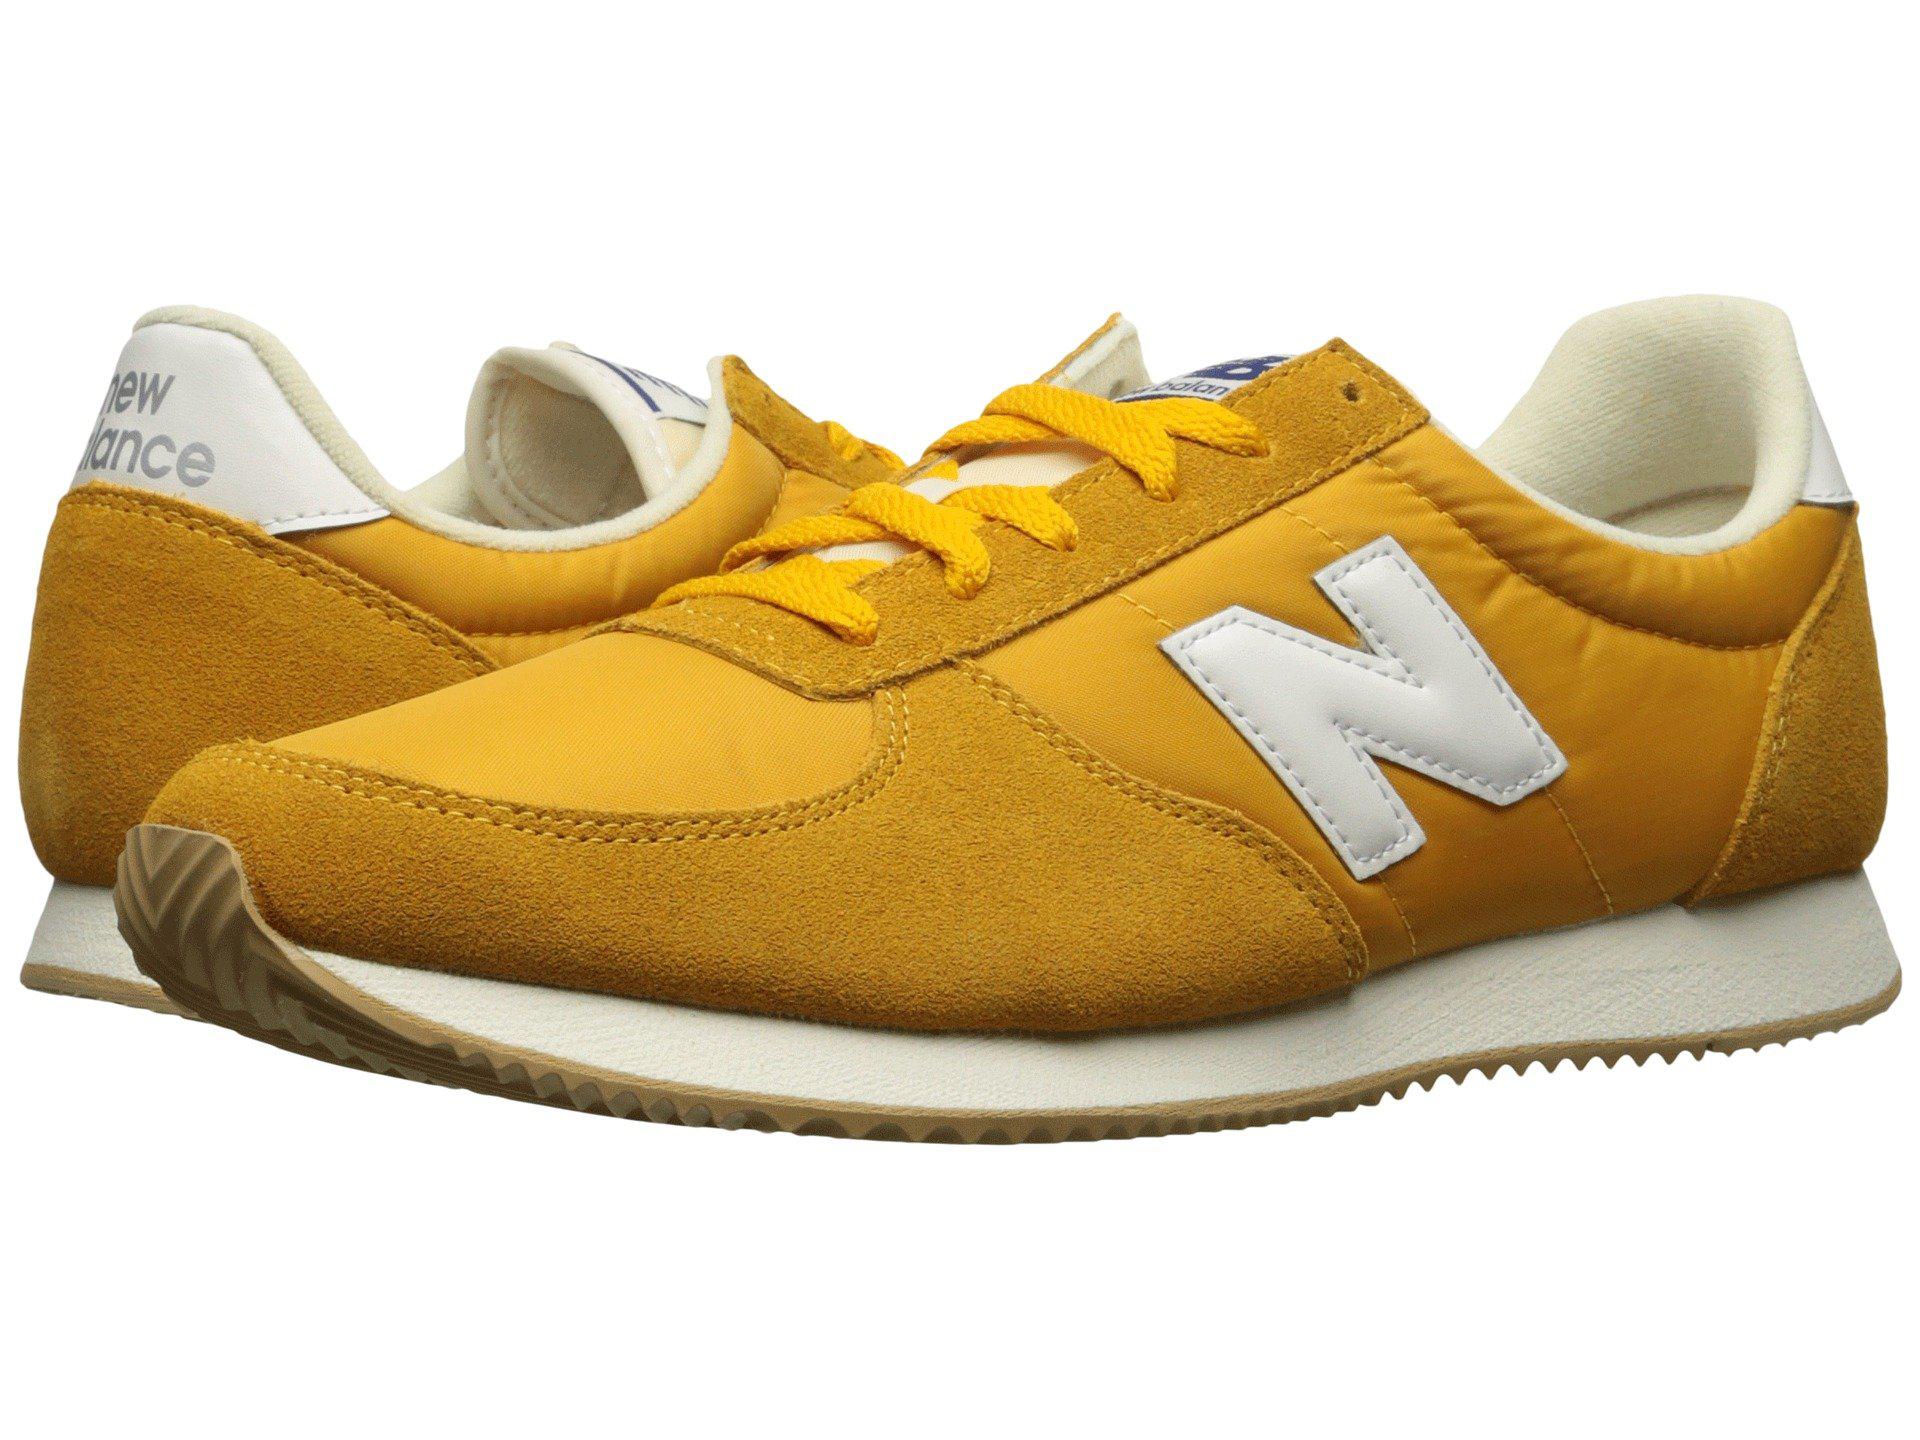 New Balance Suede U220 in Yellow/White (Yellow) for Men - Lyst